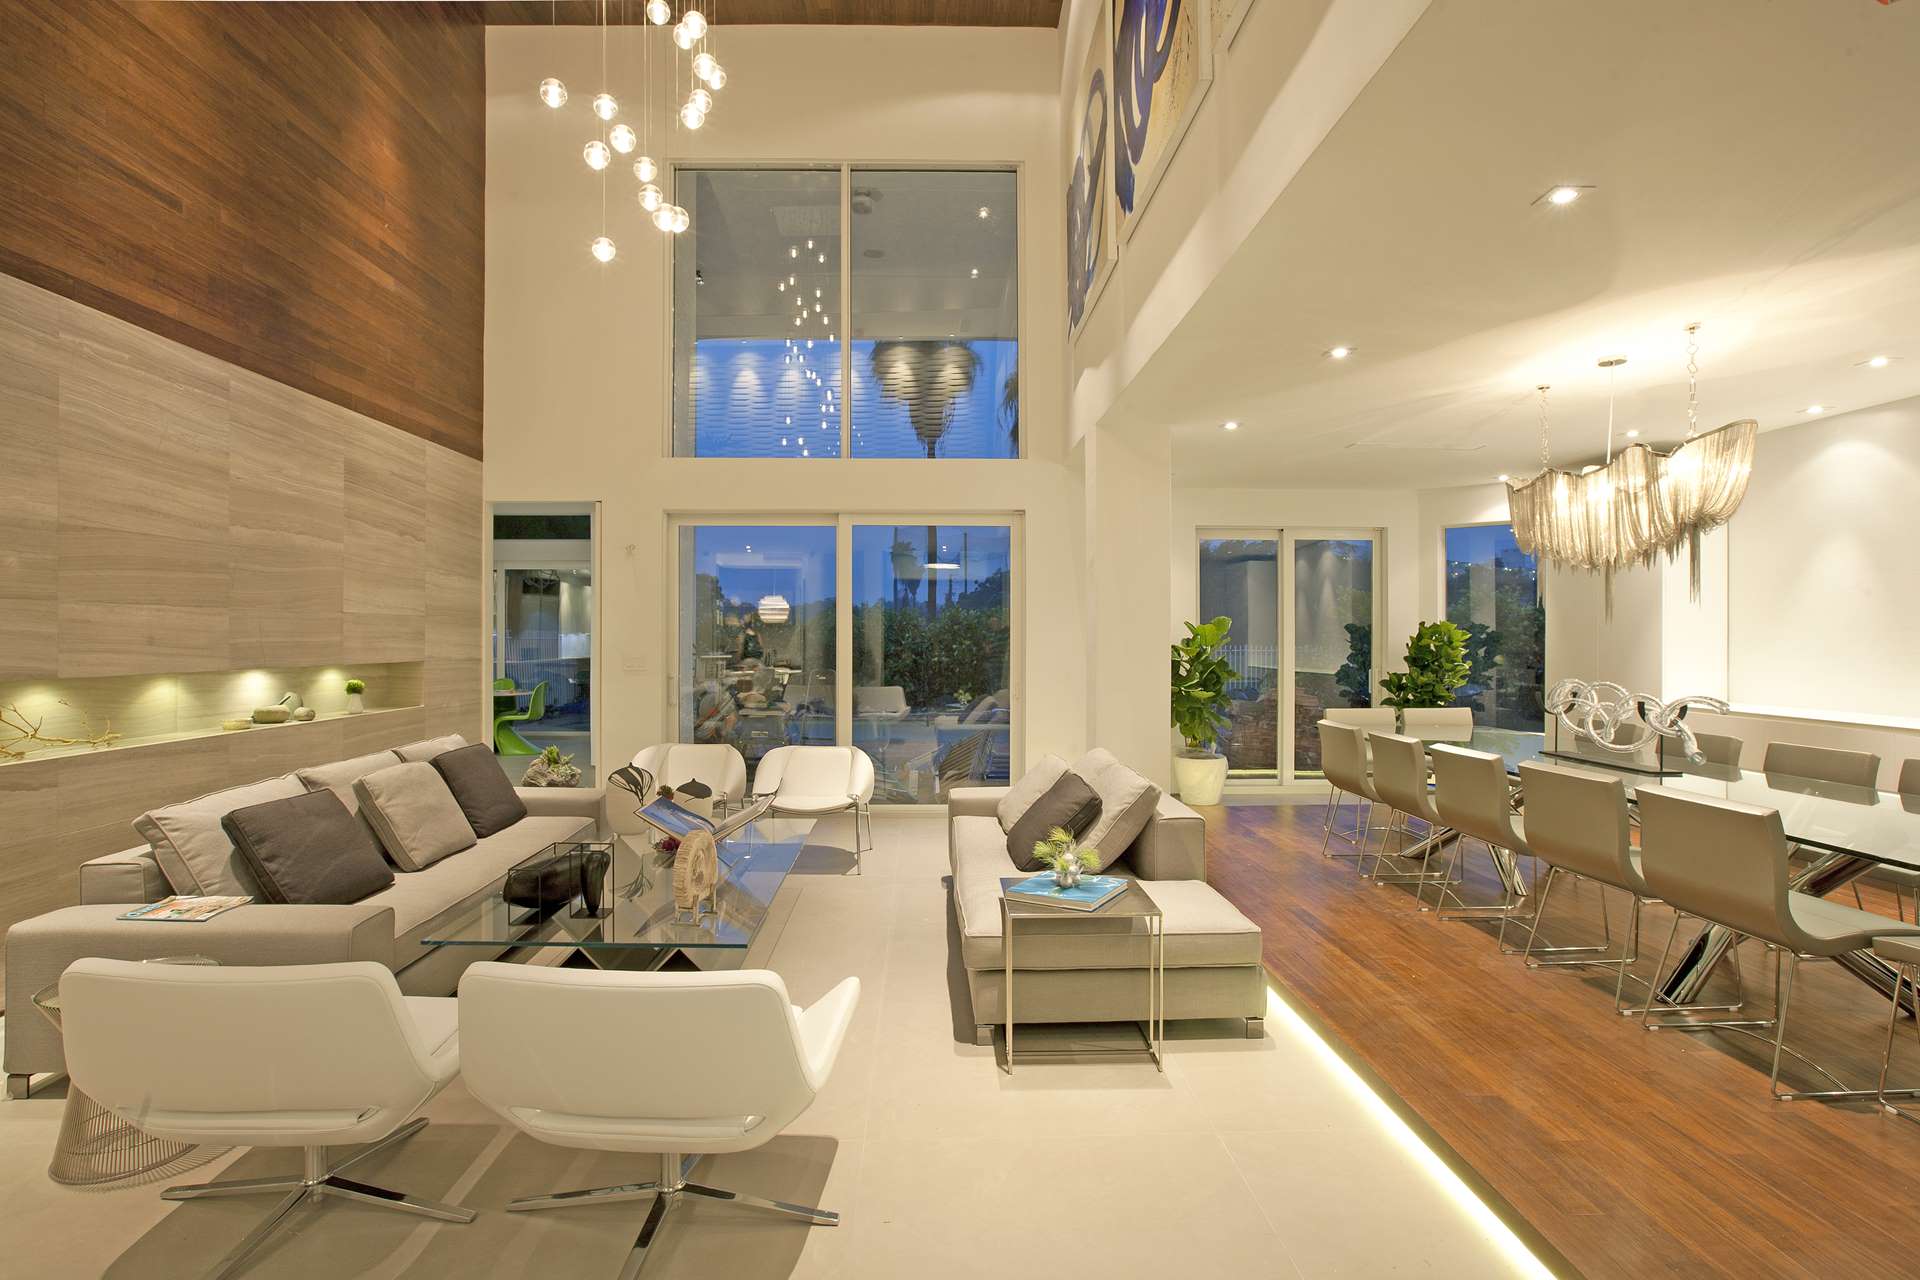 Modern Style Living Room: Capturing Contemporary Comfort